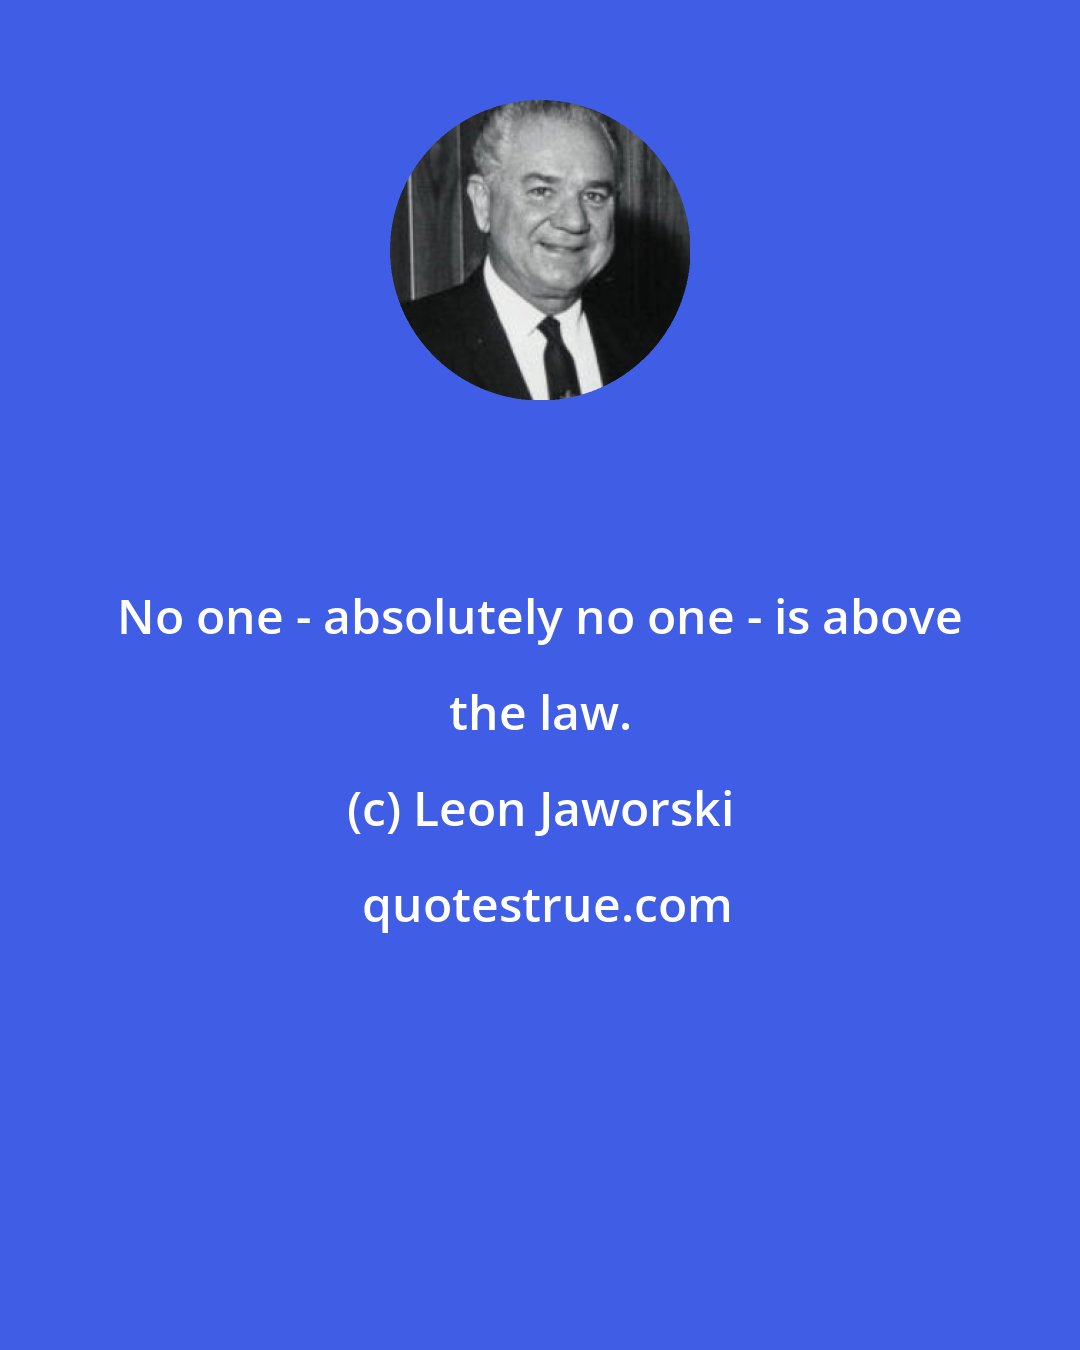 Leon Jaworski: No one - absolutely no one - is above the law.